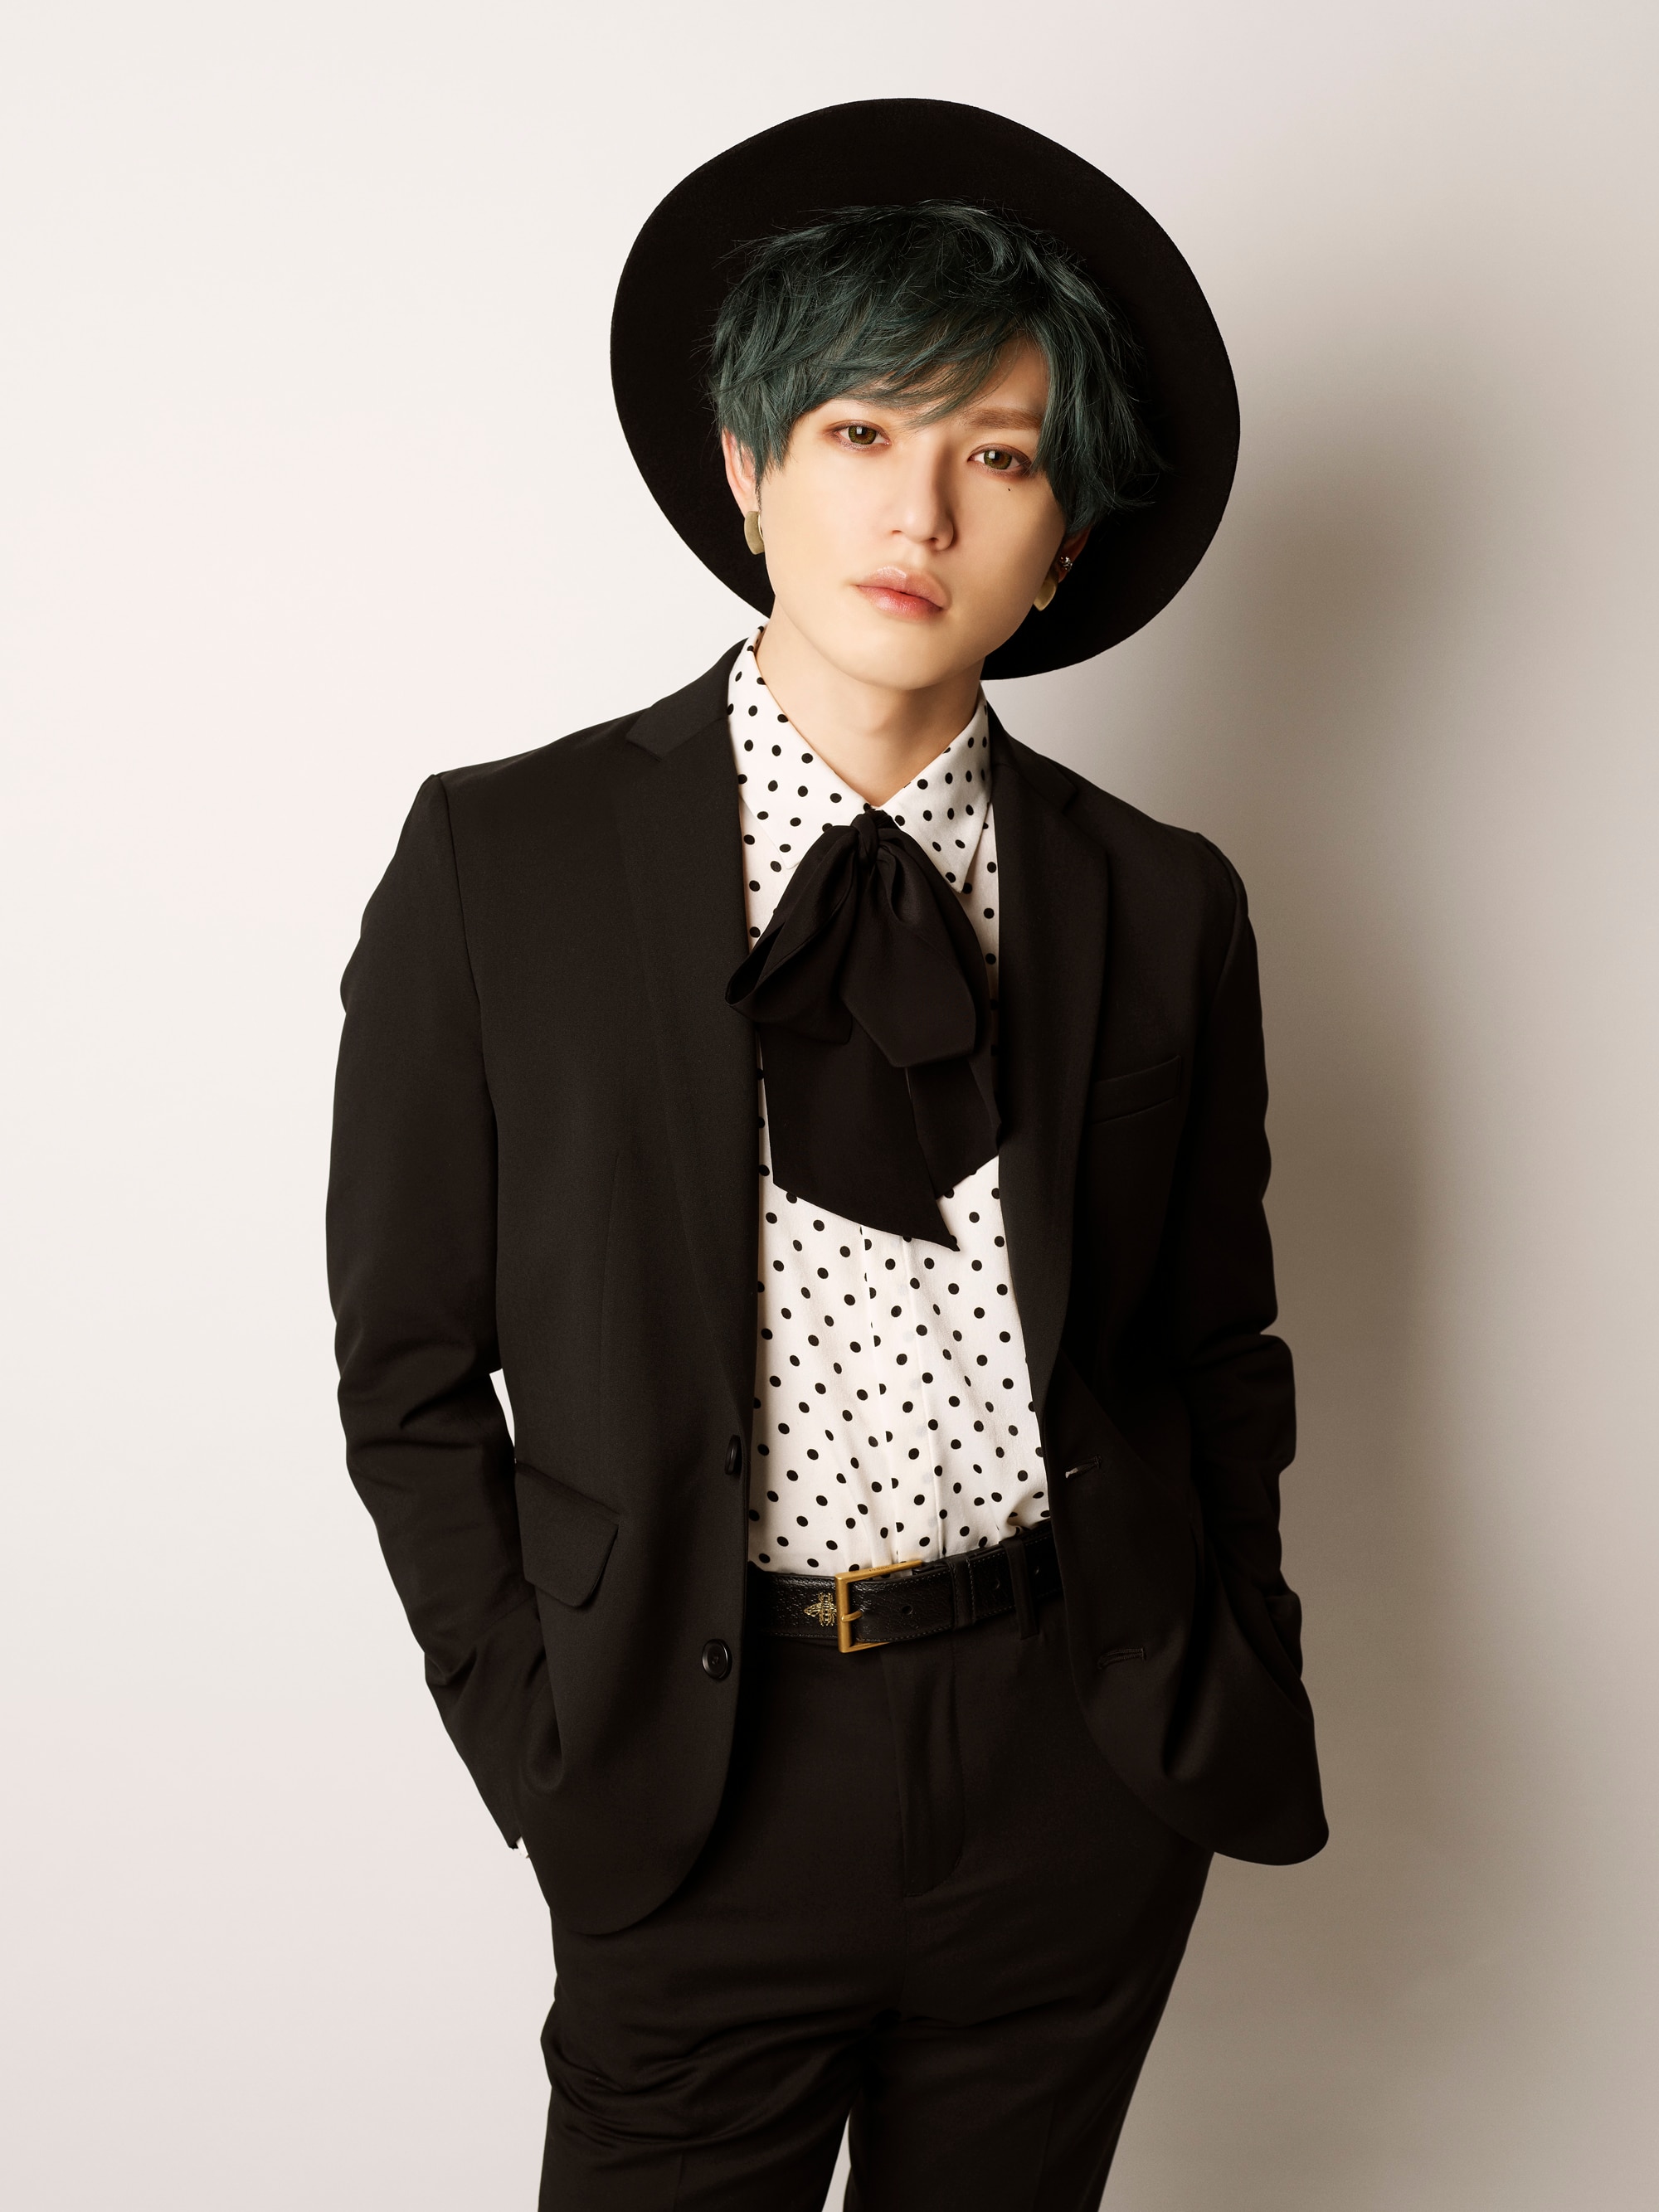 Profile a トリプル エー Official Website